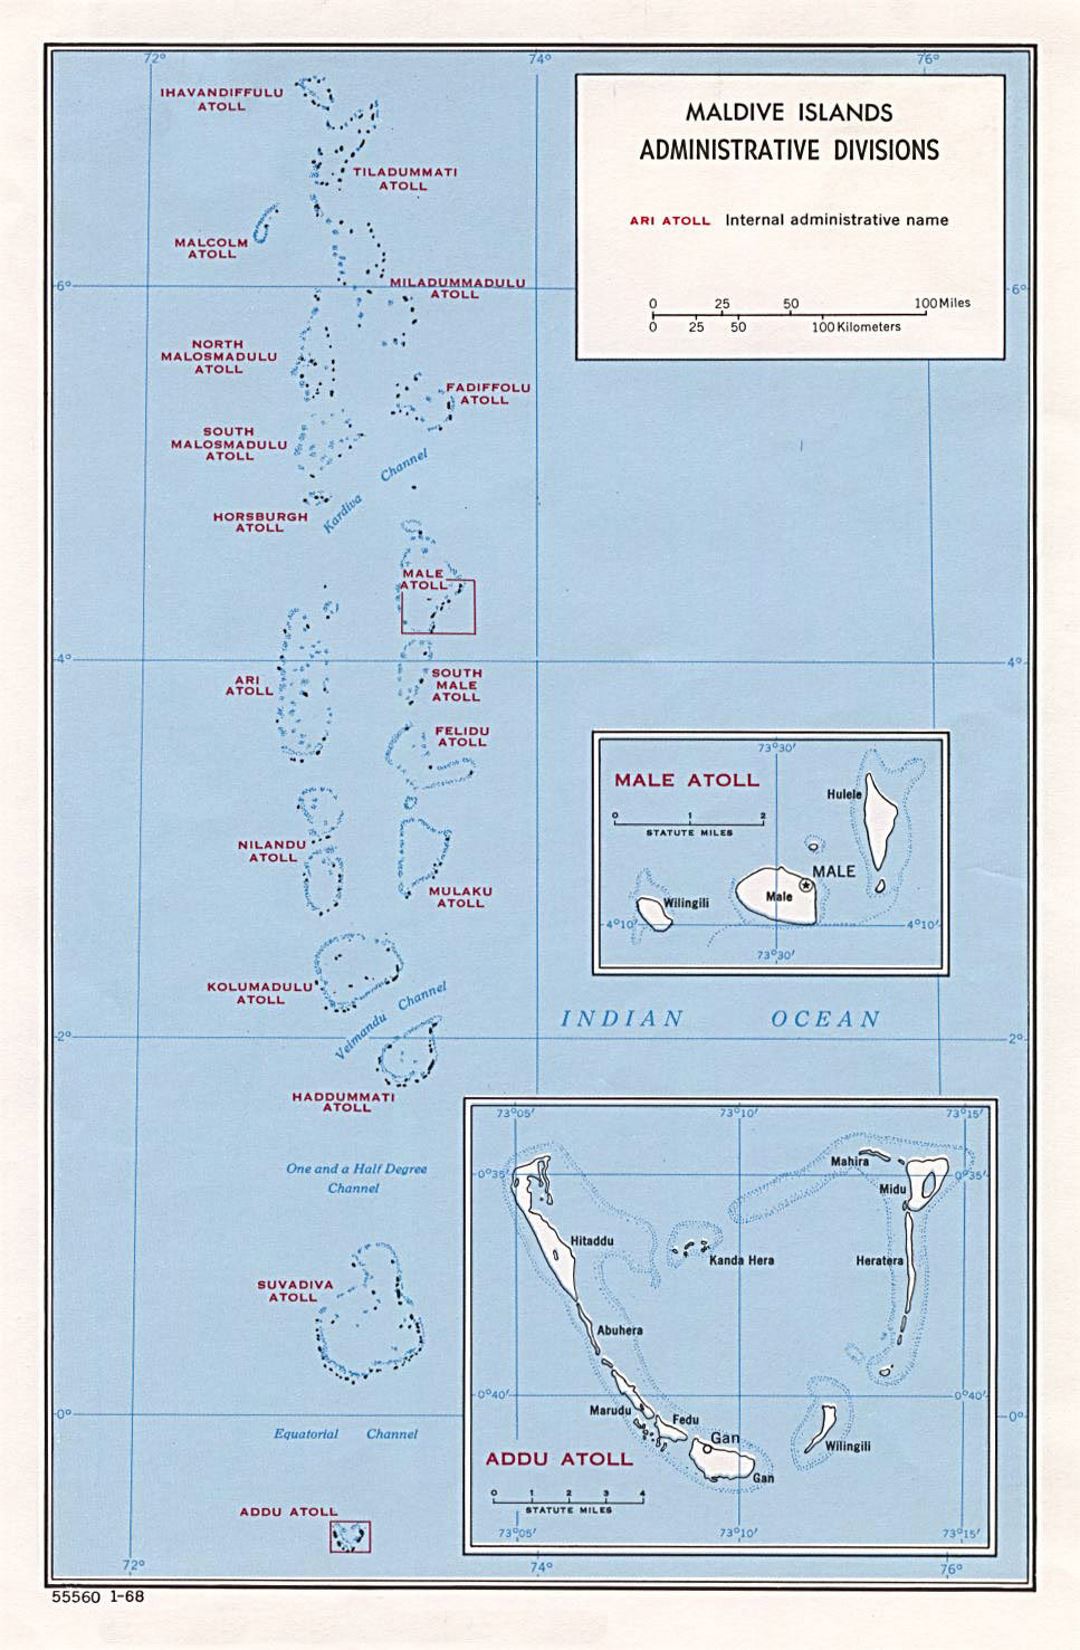 Detailed administrative divisions map of Maldives - 1968